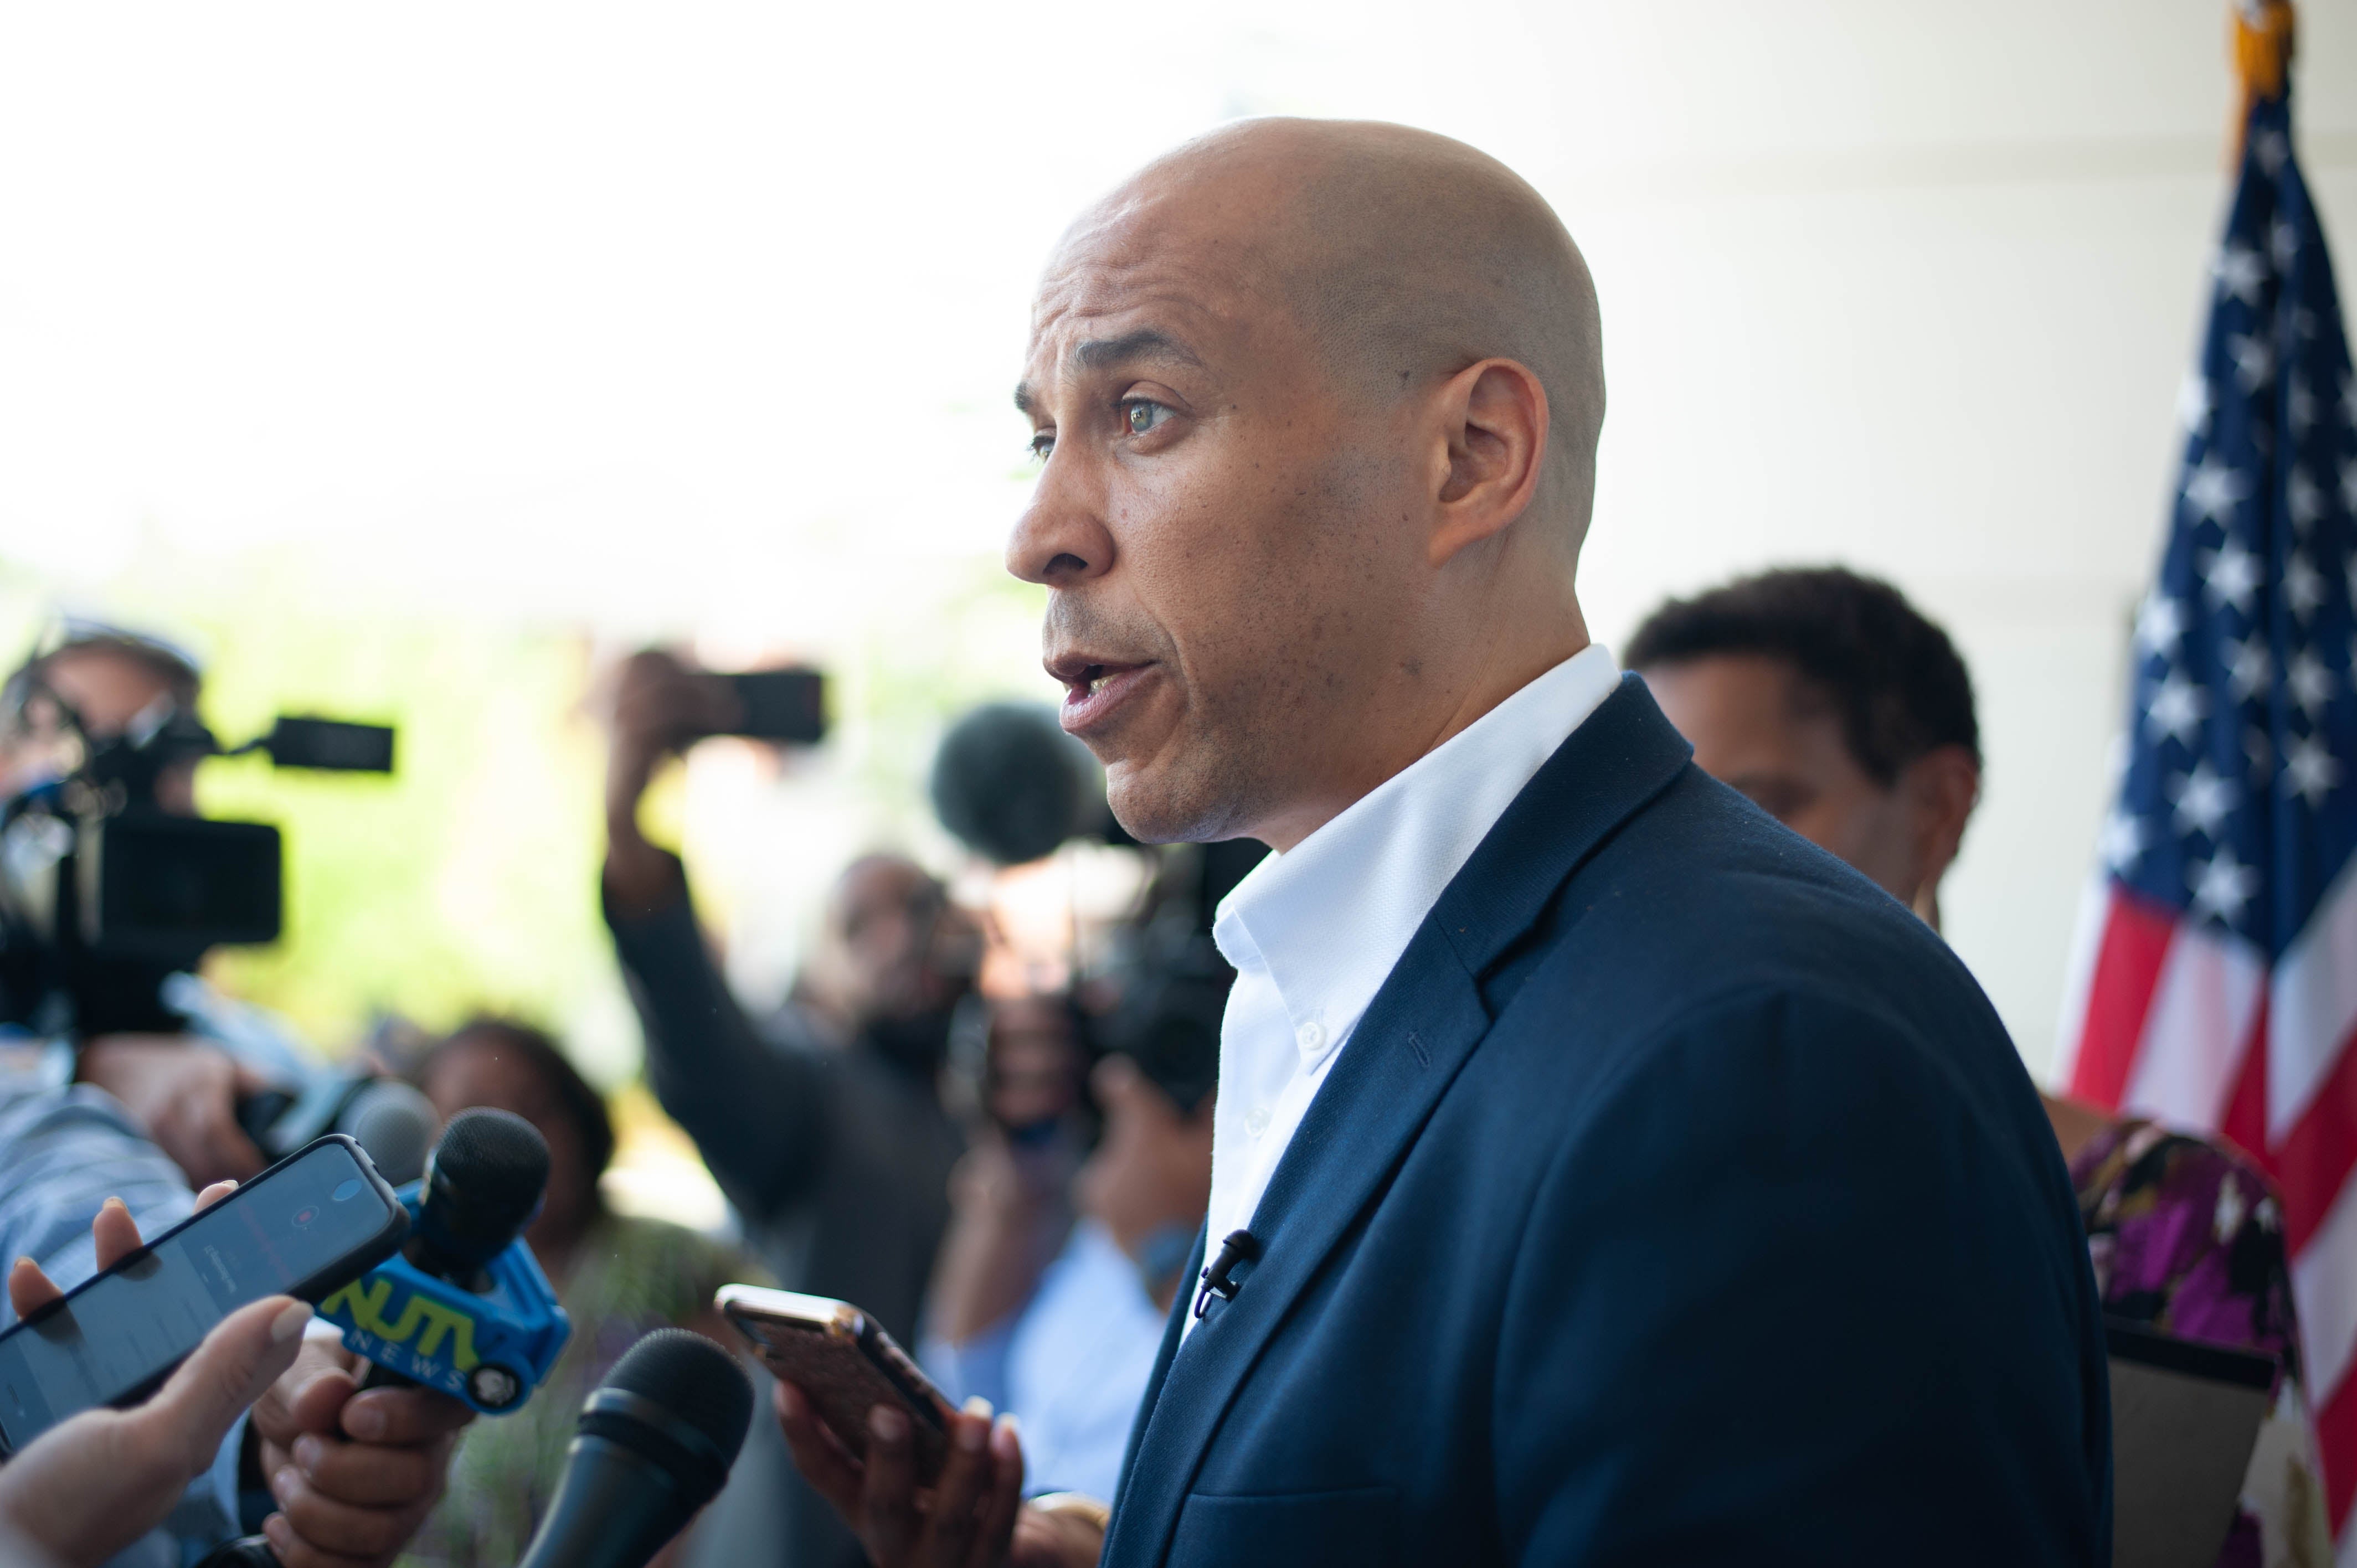 24 Hours With: Cory Booker